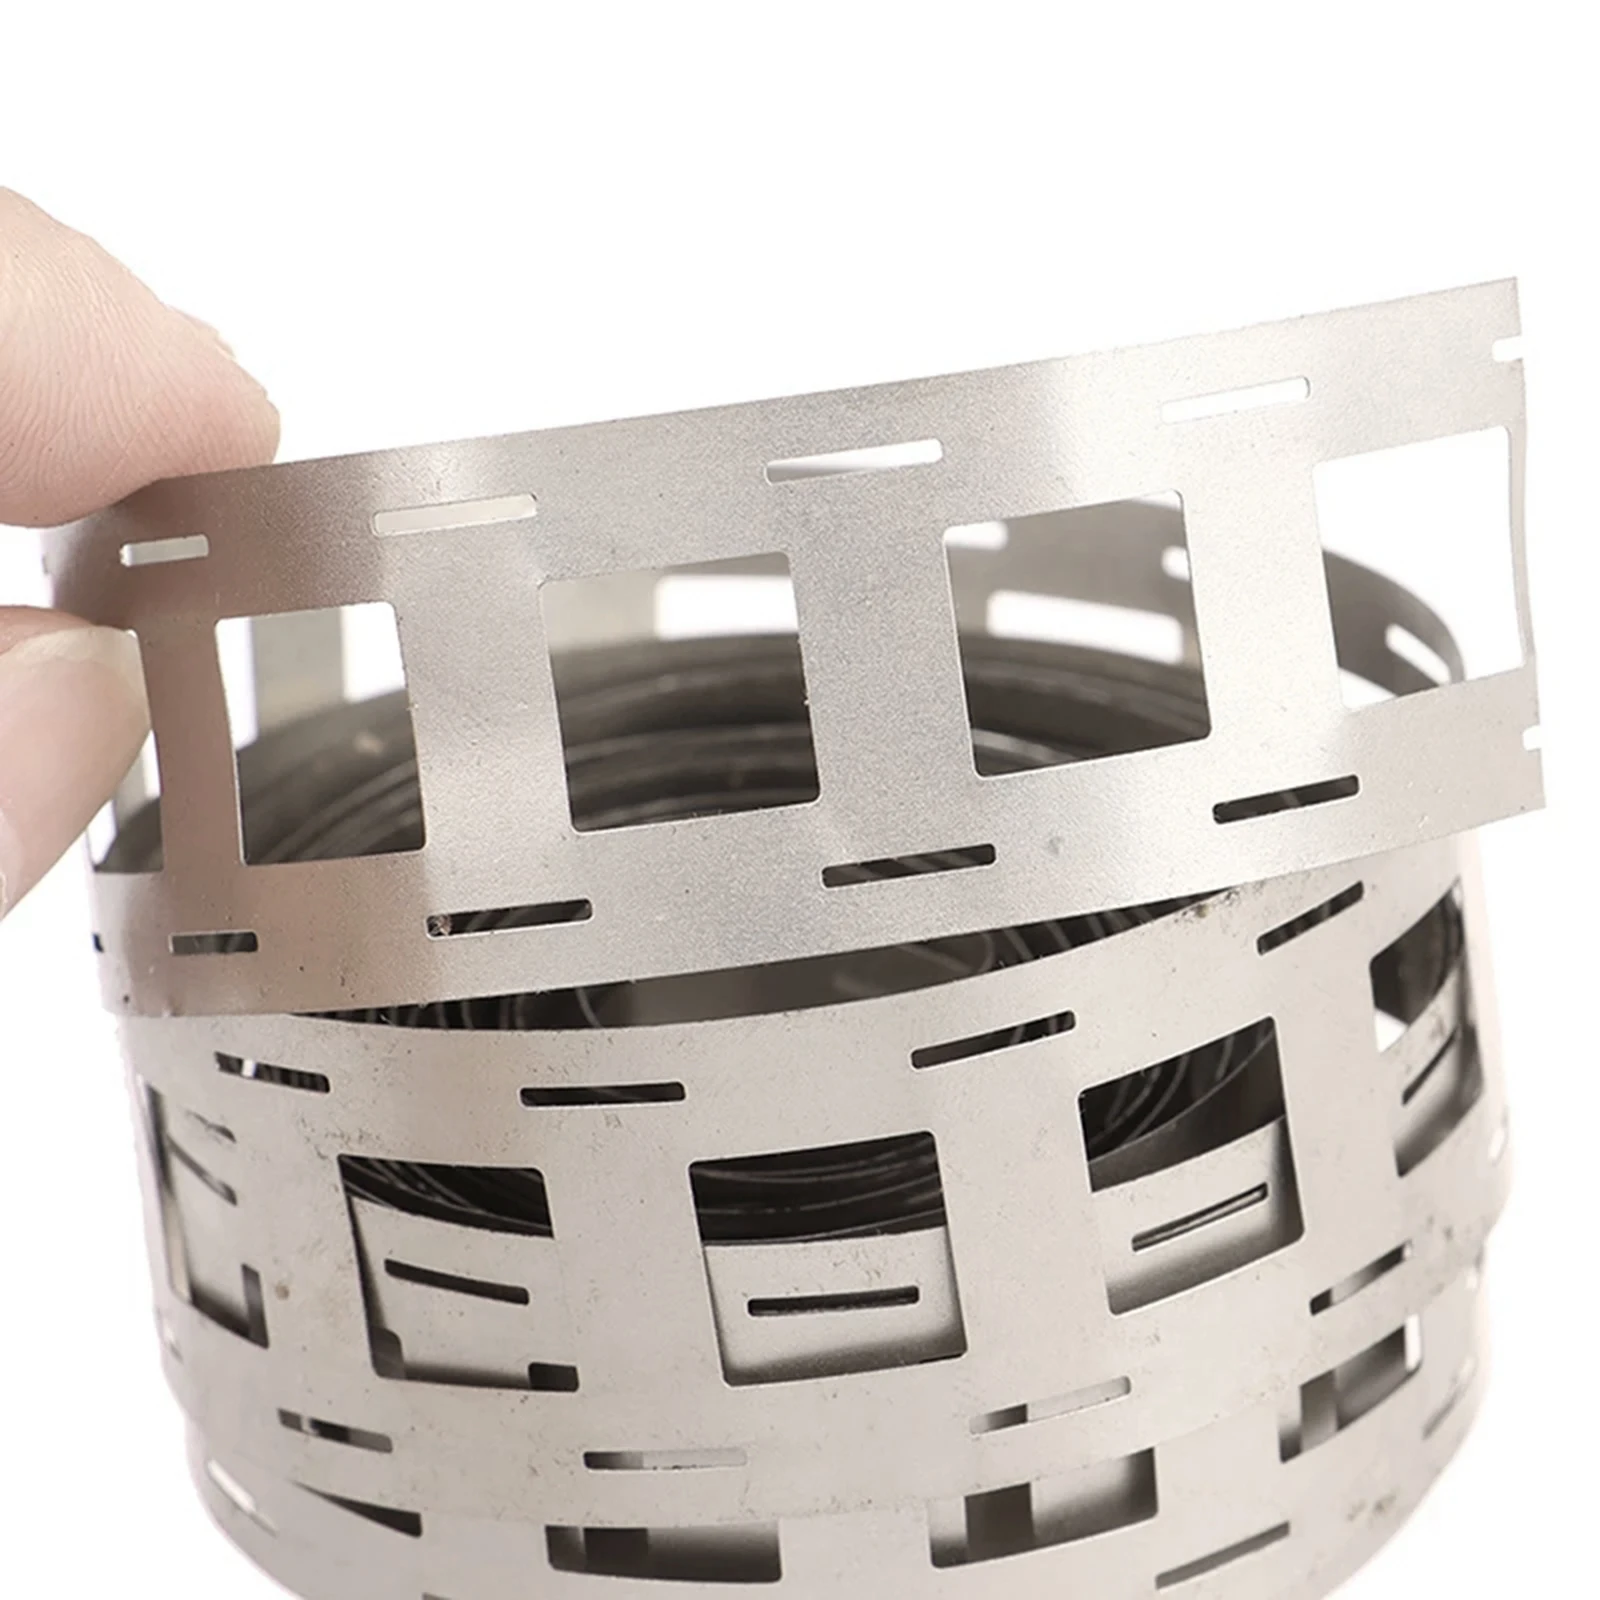 High Purity Nickel Plated Steel Strap Strip Belt Tape Plate 1M 3.2ft 27mm for 18650 Batteries Spot Welding Connect Solder Parts